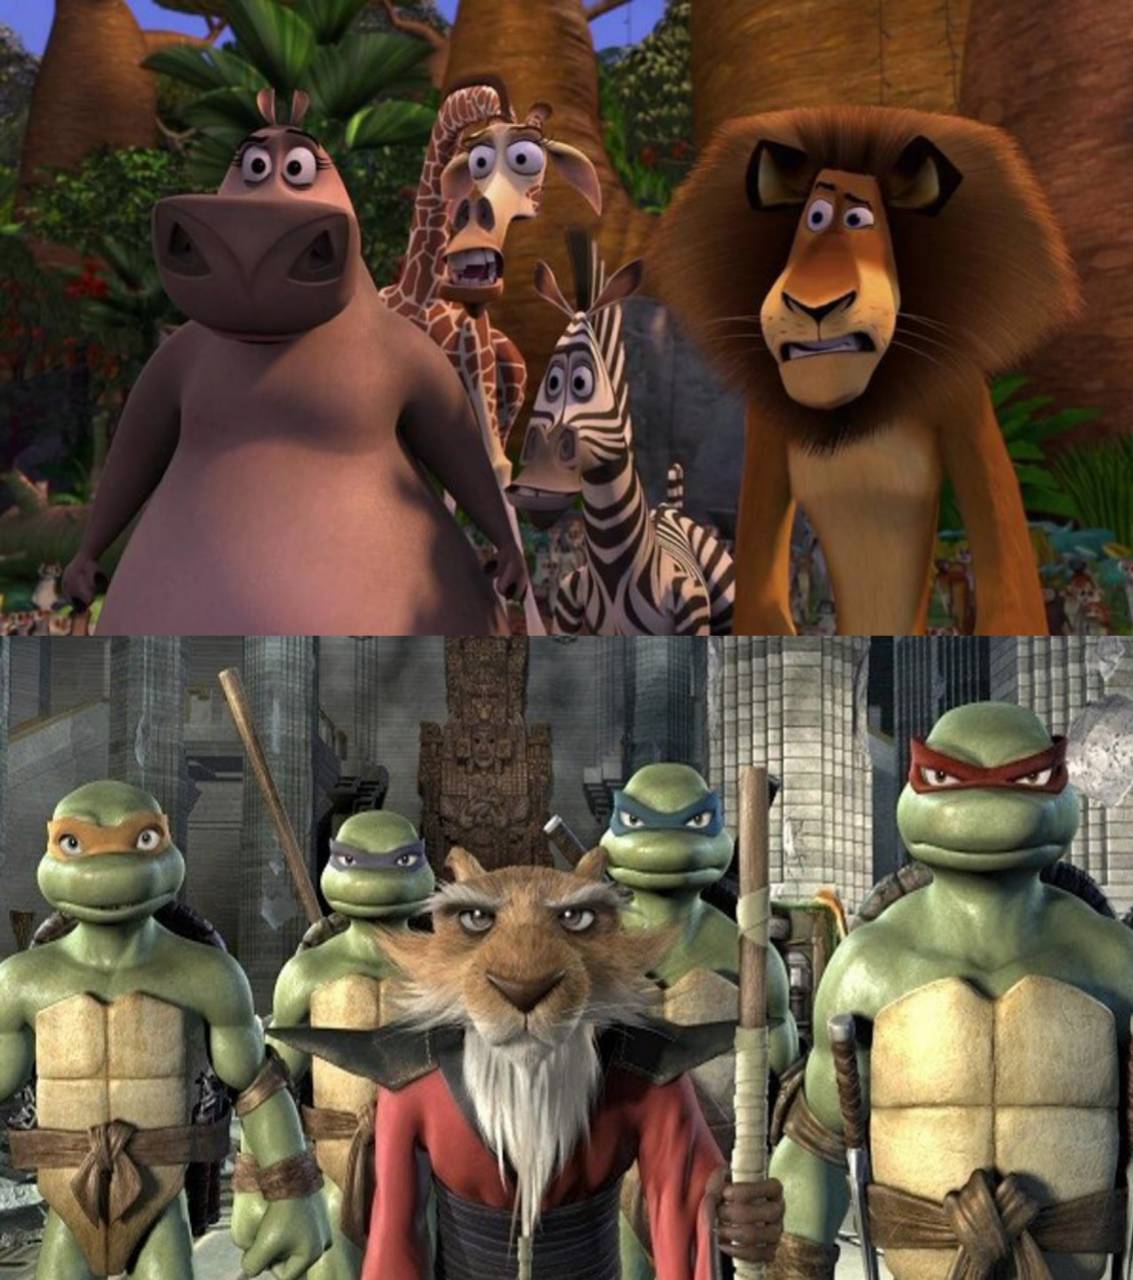 Madagascar Meets TMNT (2007) by myjosephpatty2002 on DeviantArt